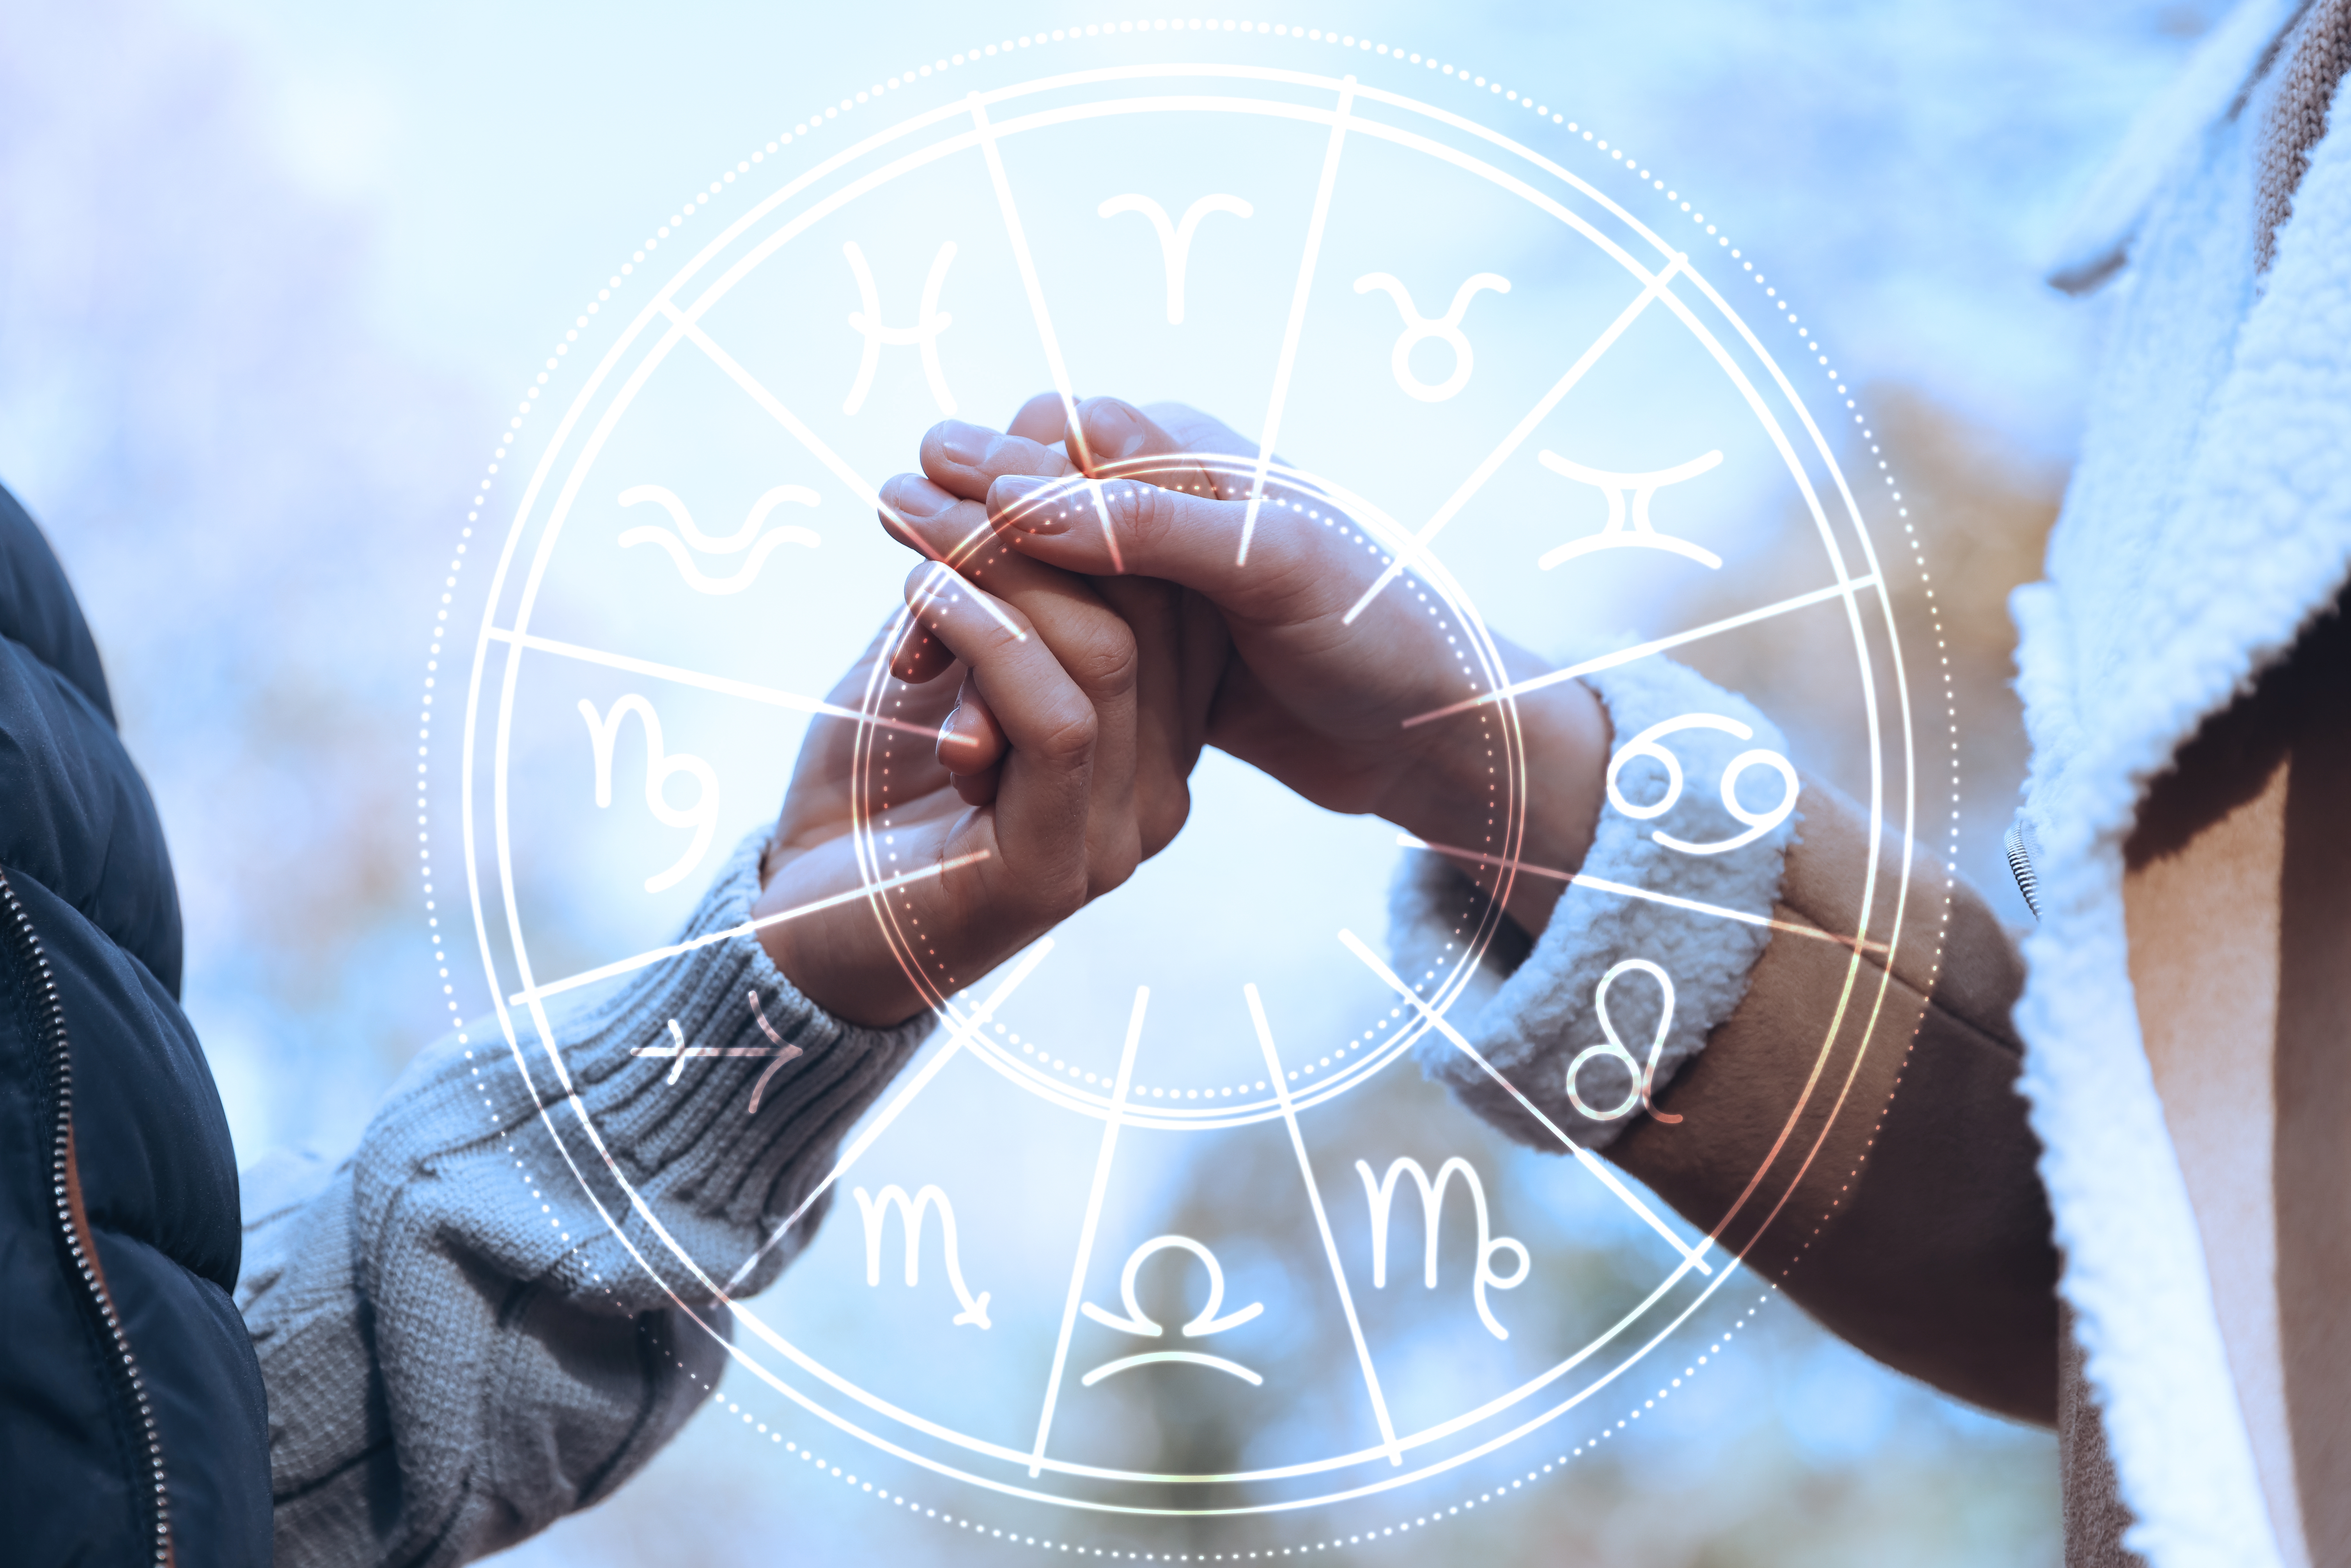 Horoscope compatibility: A loving couple holding hands outdoors and zodiac wheel. | Source: Shutterstock